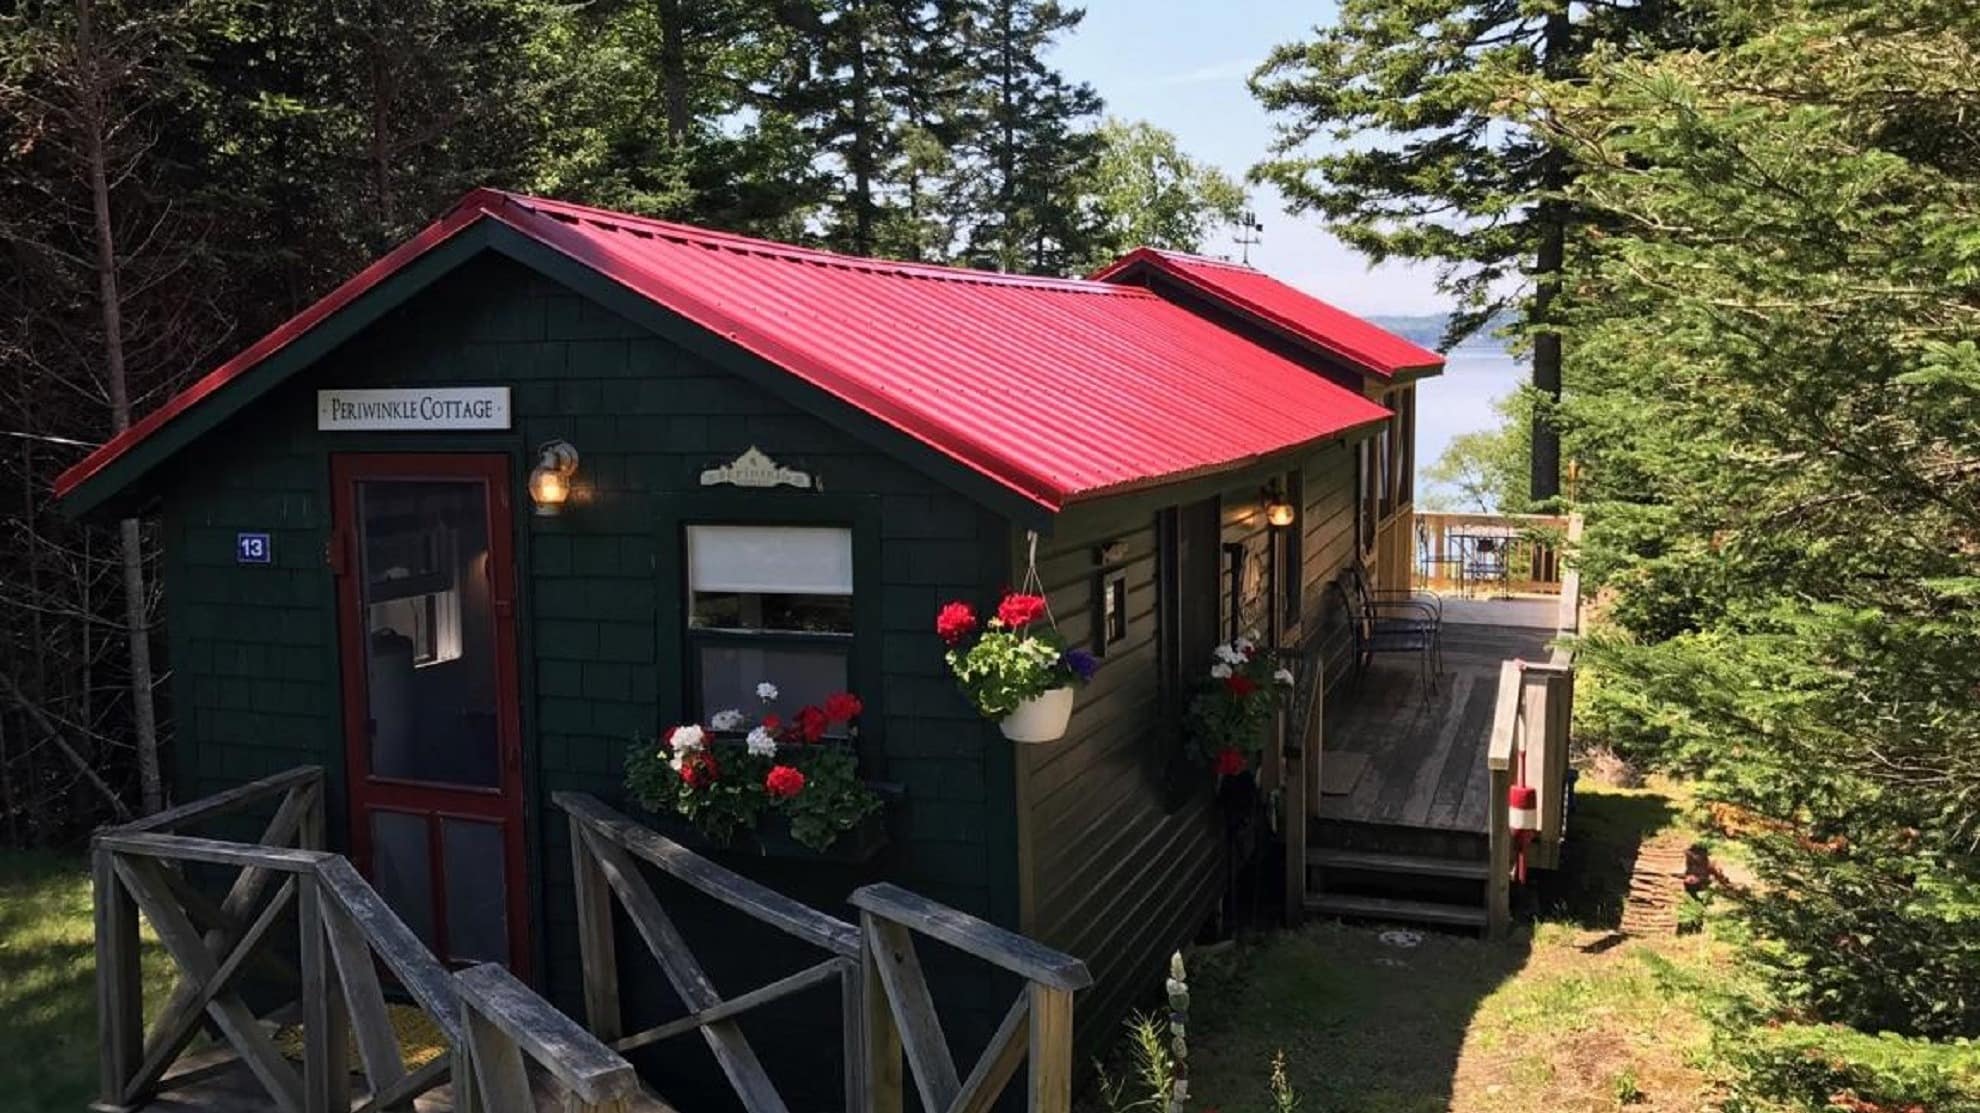 Have fun in nature with cottage rentals in New Brunswick